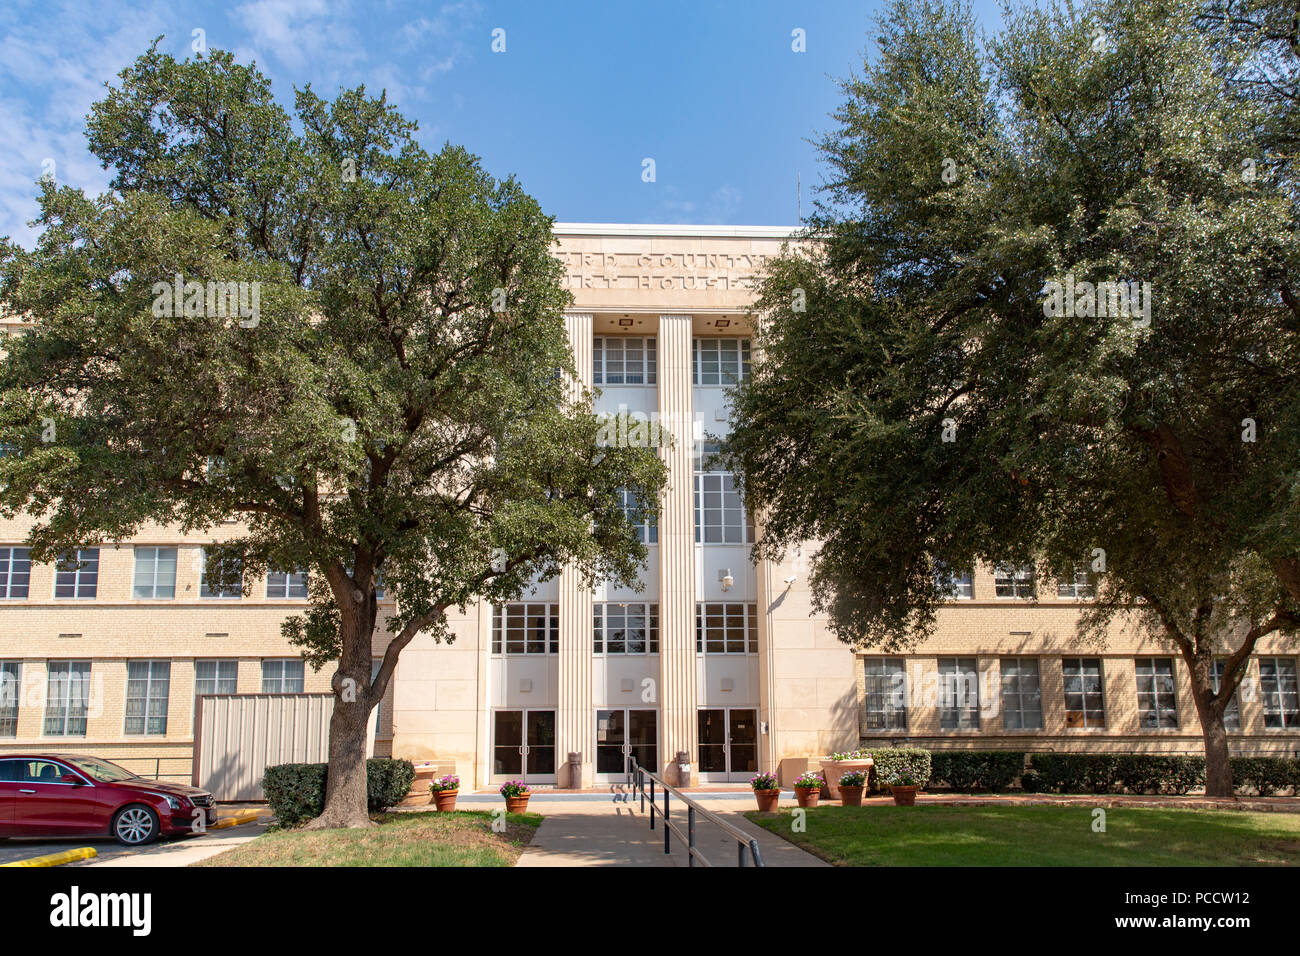 L' Howard County Courthouse in Big Spring Texas in stile moderno Foto Stock